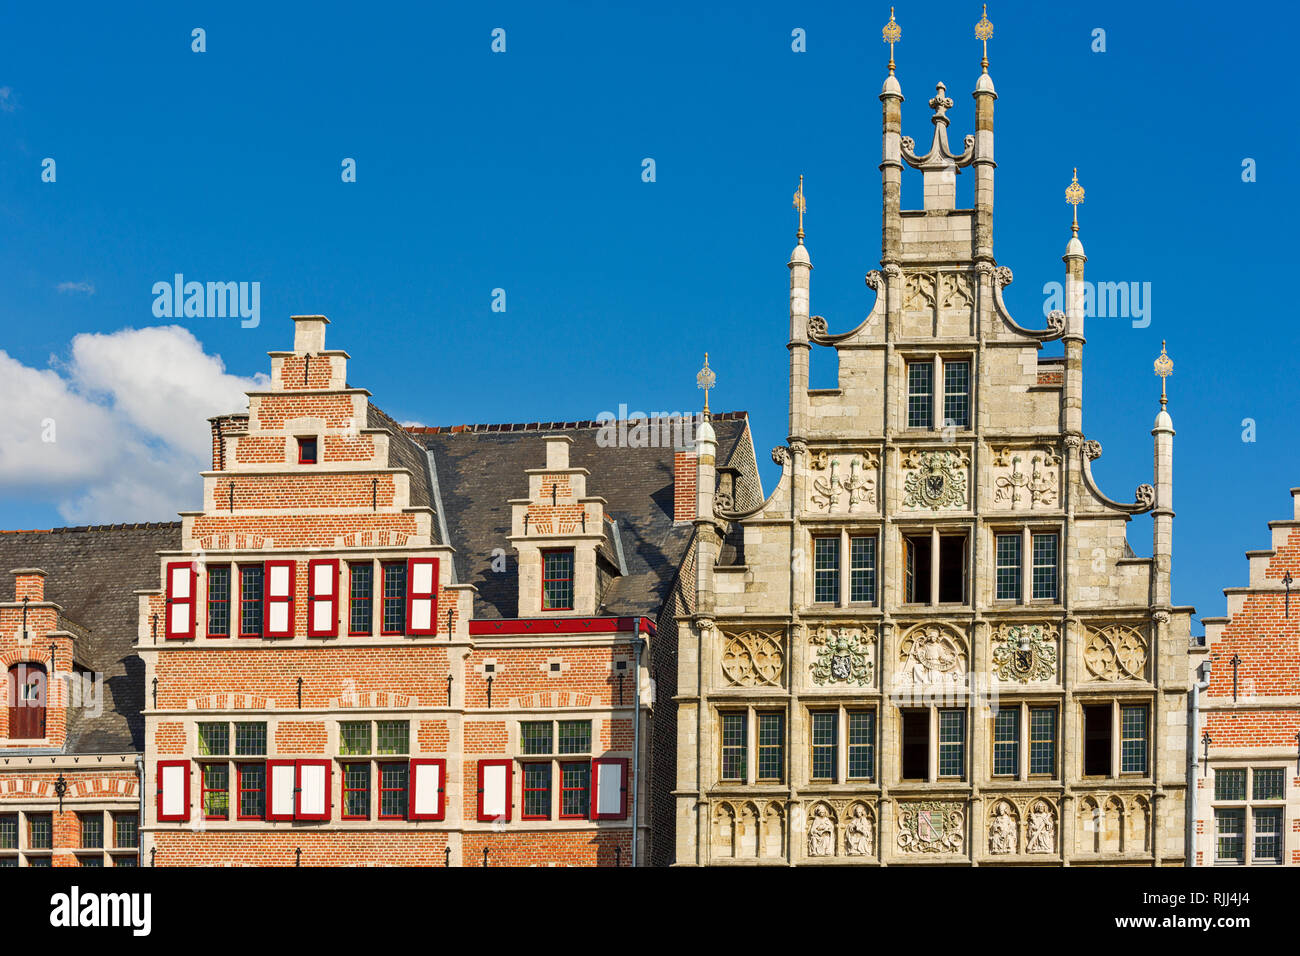 Den Enghel house a brewery trading house in the historic city center of Ghent Stock Photo